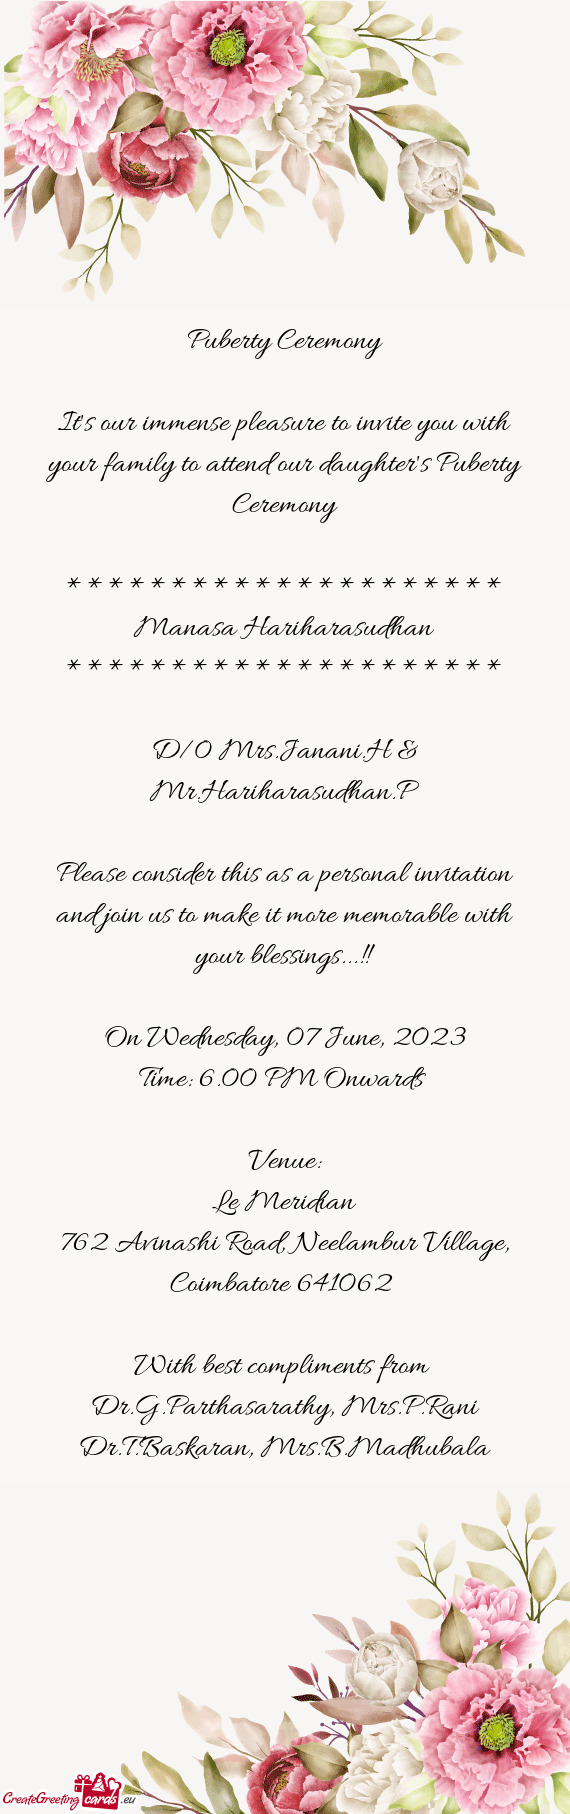 Please consider this as a personal invitation and join us to make it more memorable with your blessi